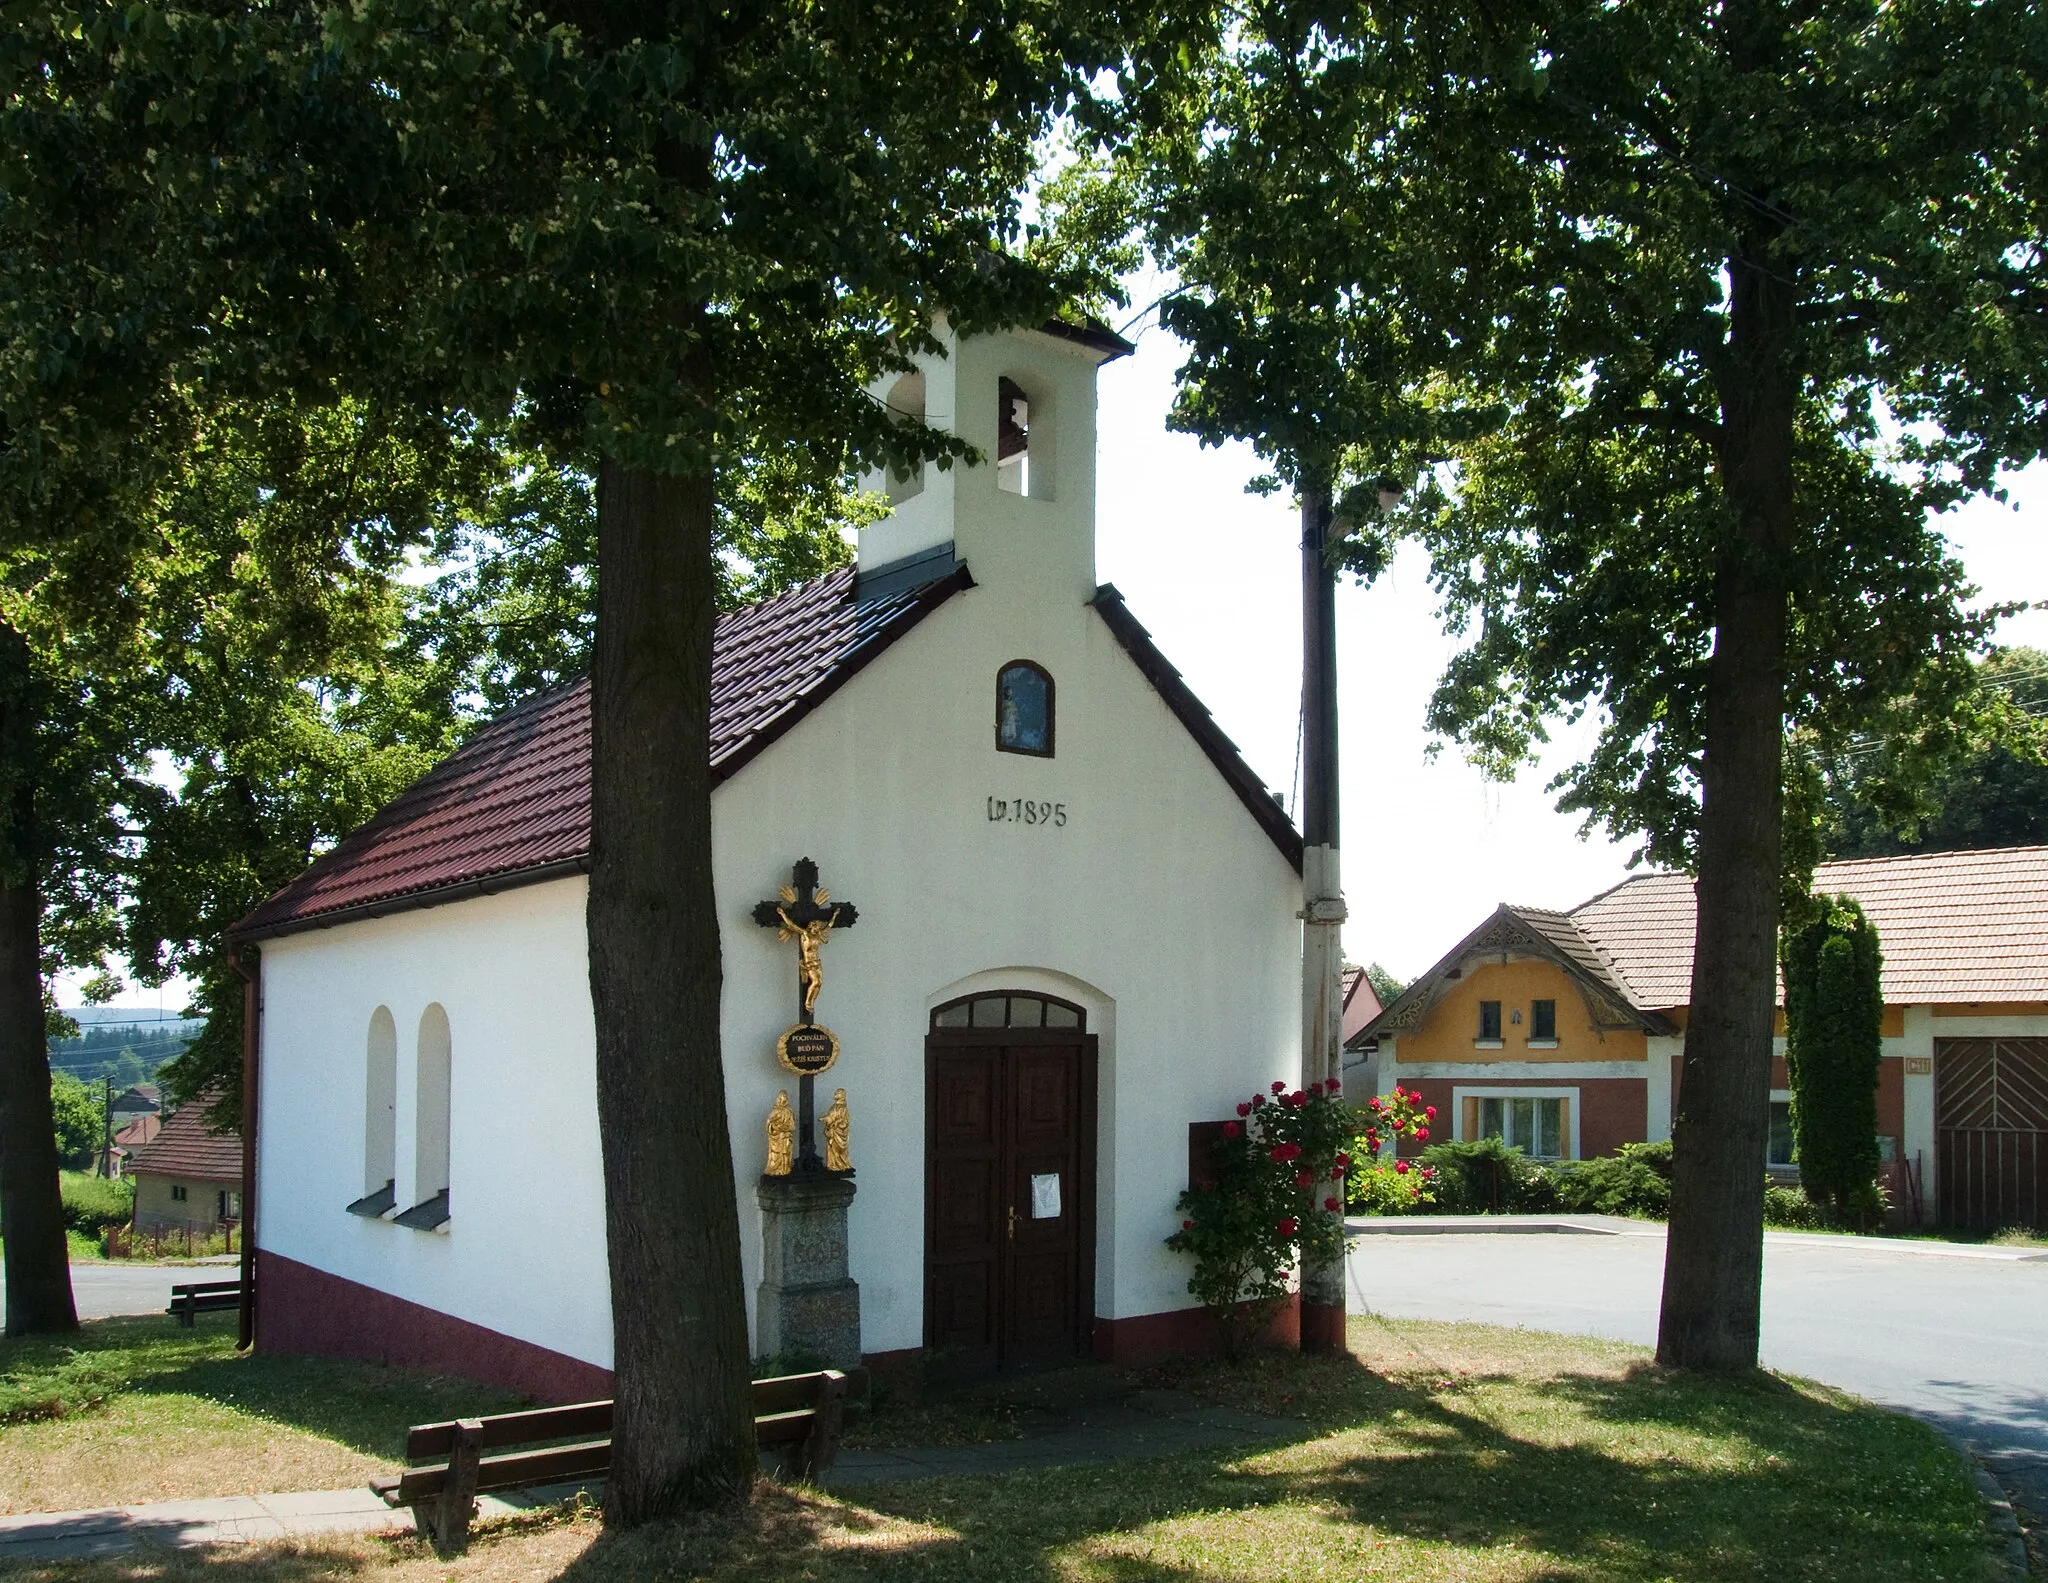 Photo showing: St. Wenceslaus Chapel in the village of Kladruby, Benešov district, Czech Republic from 1895